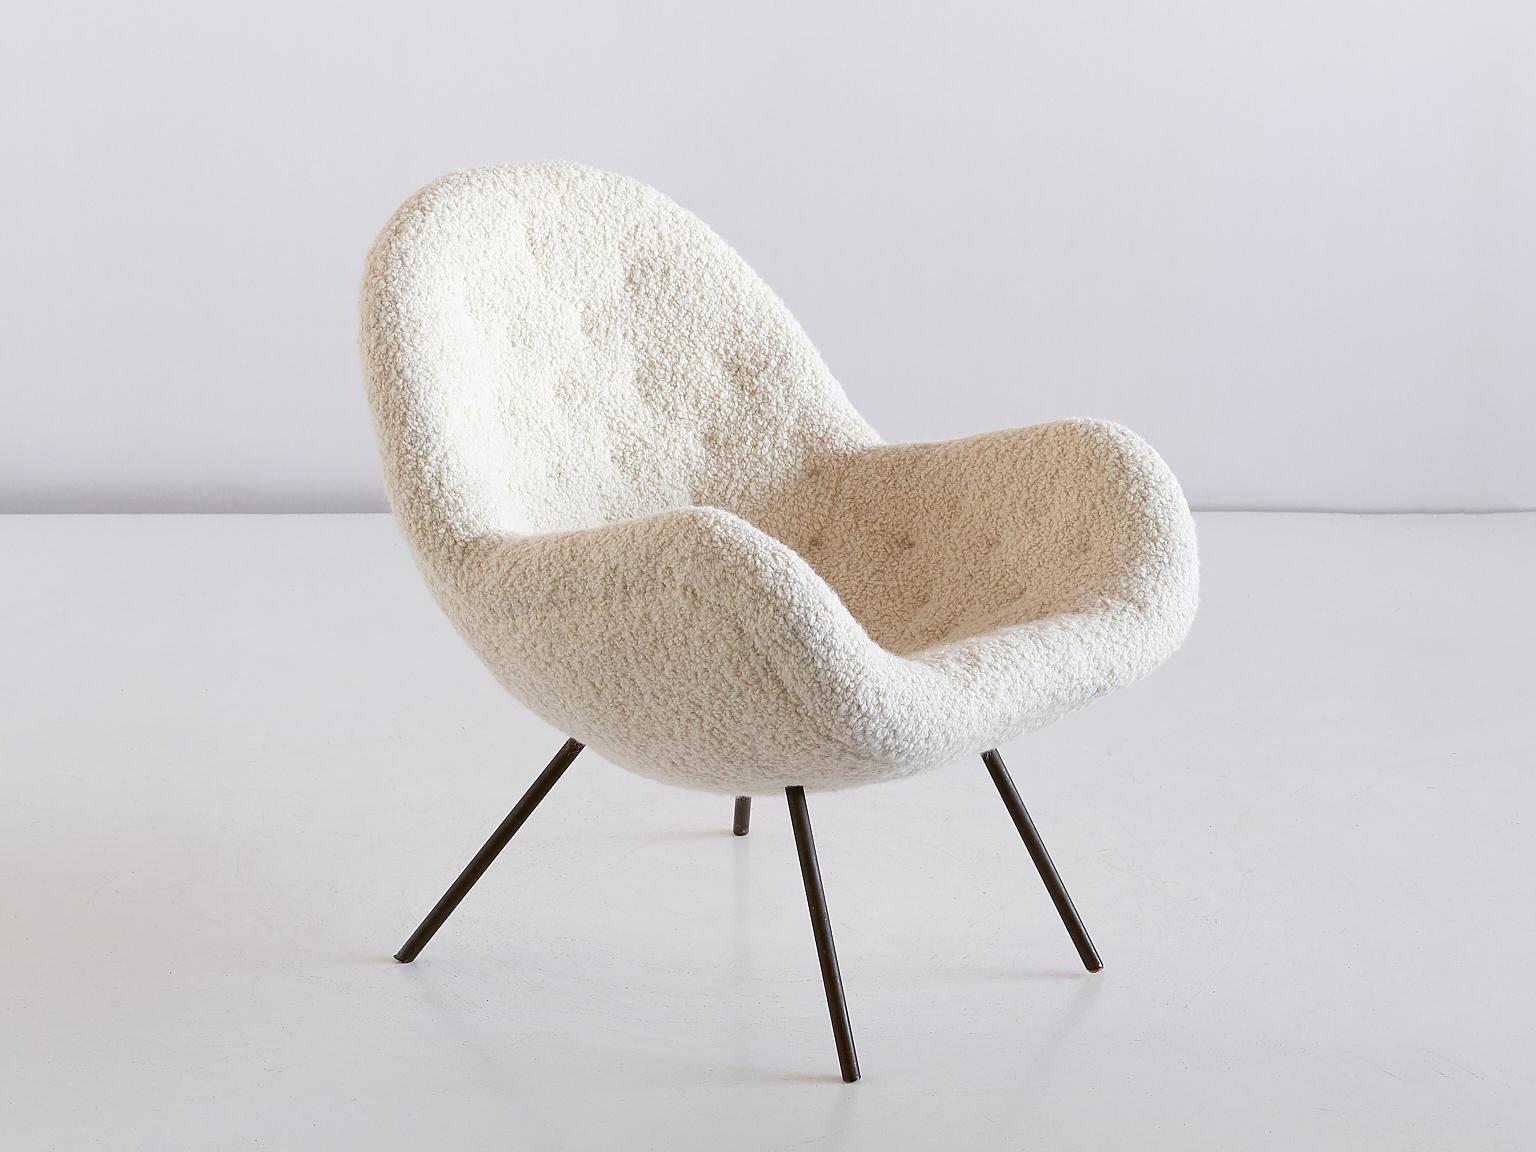 This rare lounge chair was designed by Fritz Neth and produced by the Correcta Sitzformbau Company in Kassel, Germany in the early 1950s. The organic and round lines of the egg shaped shell give the chair a striking and inviting appearance. The